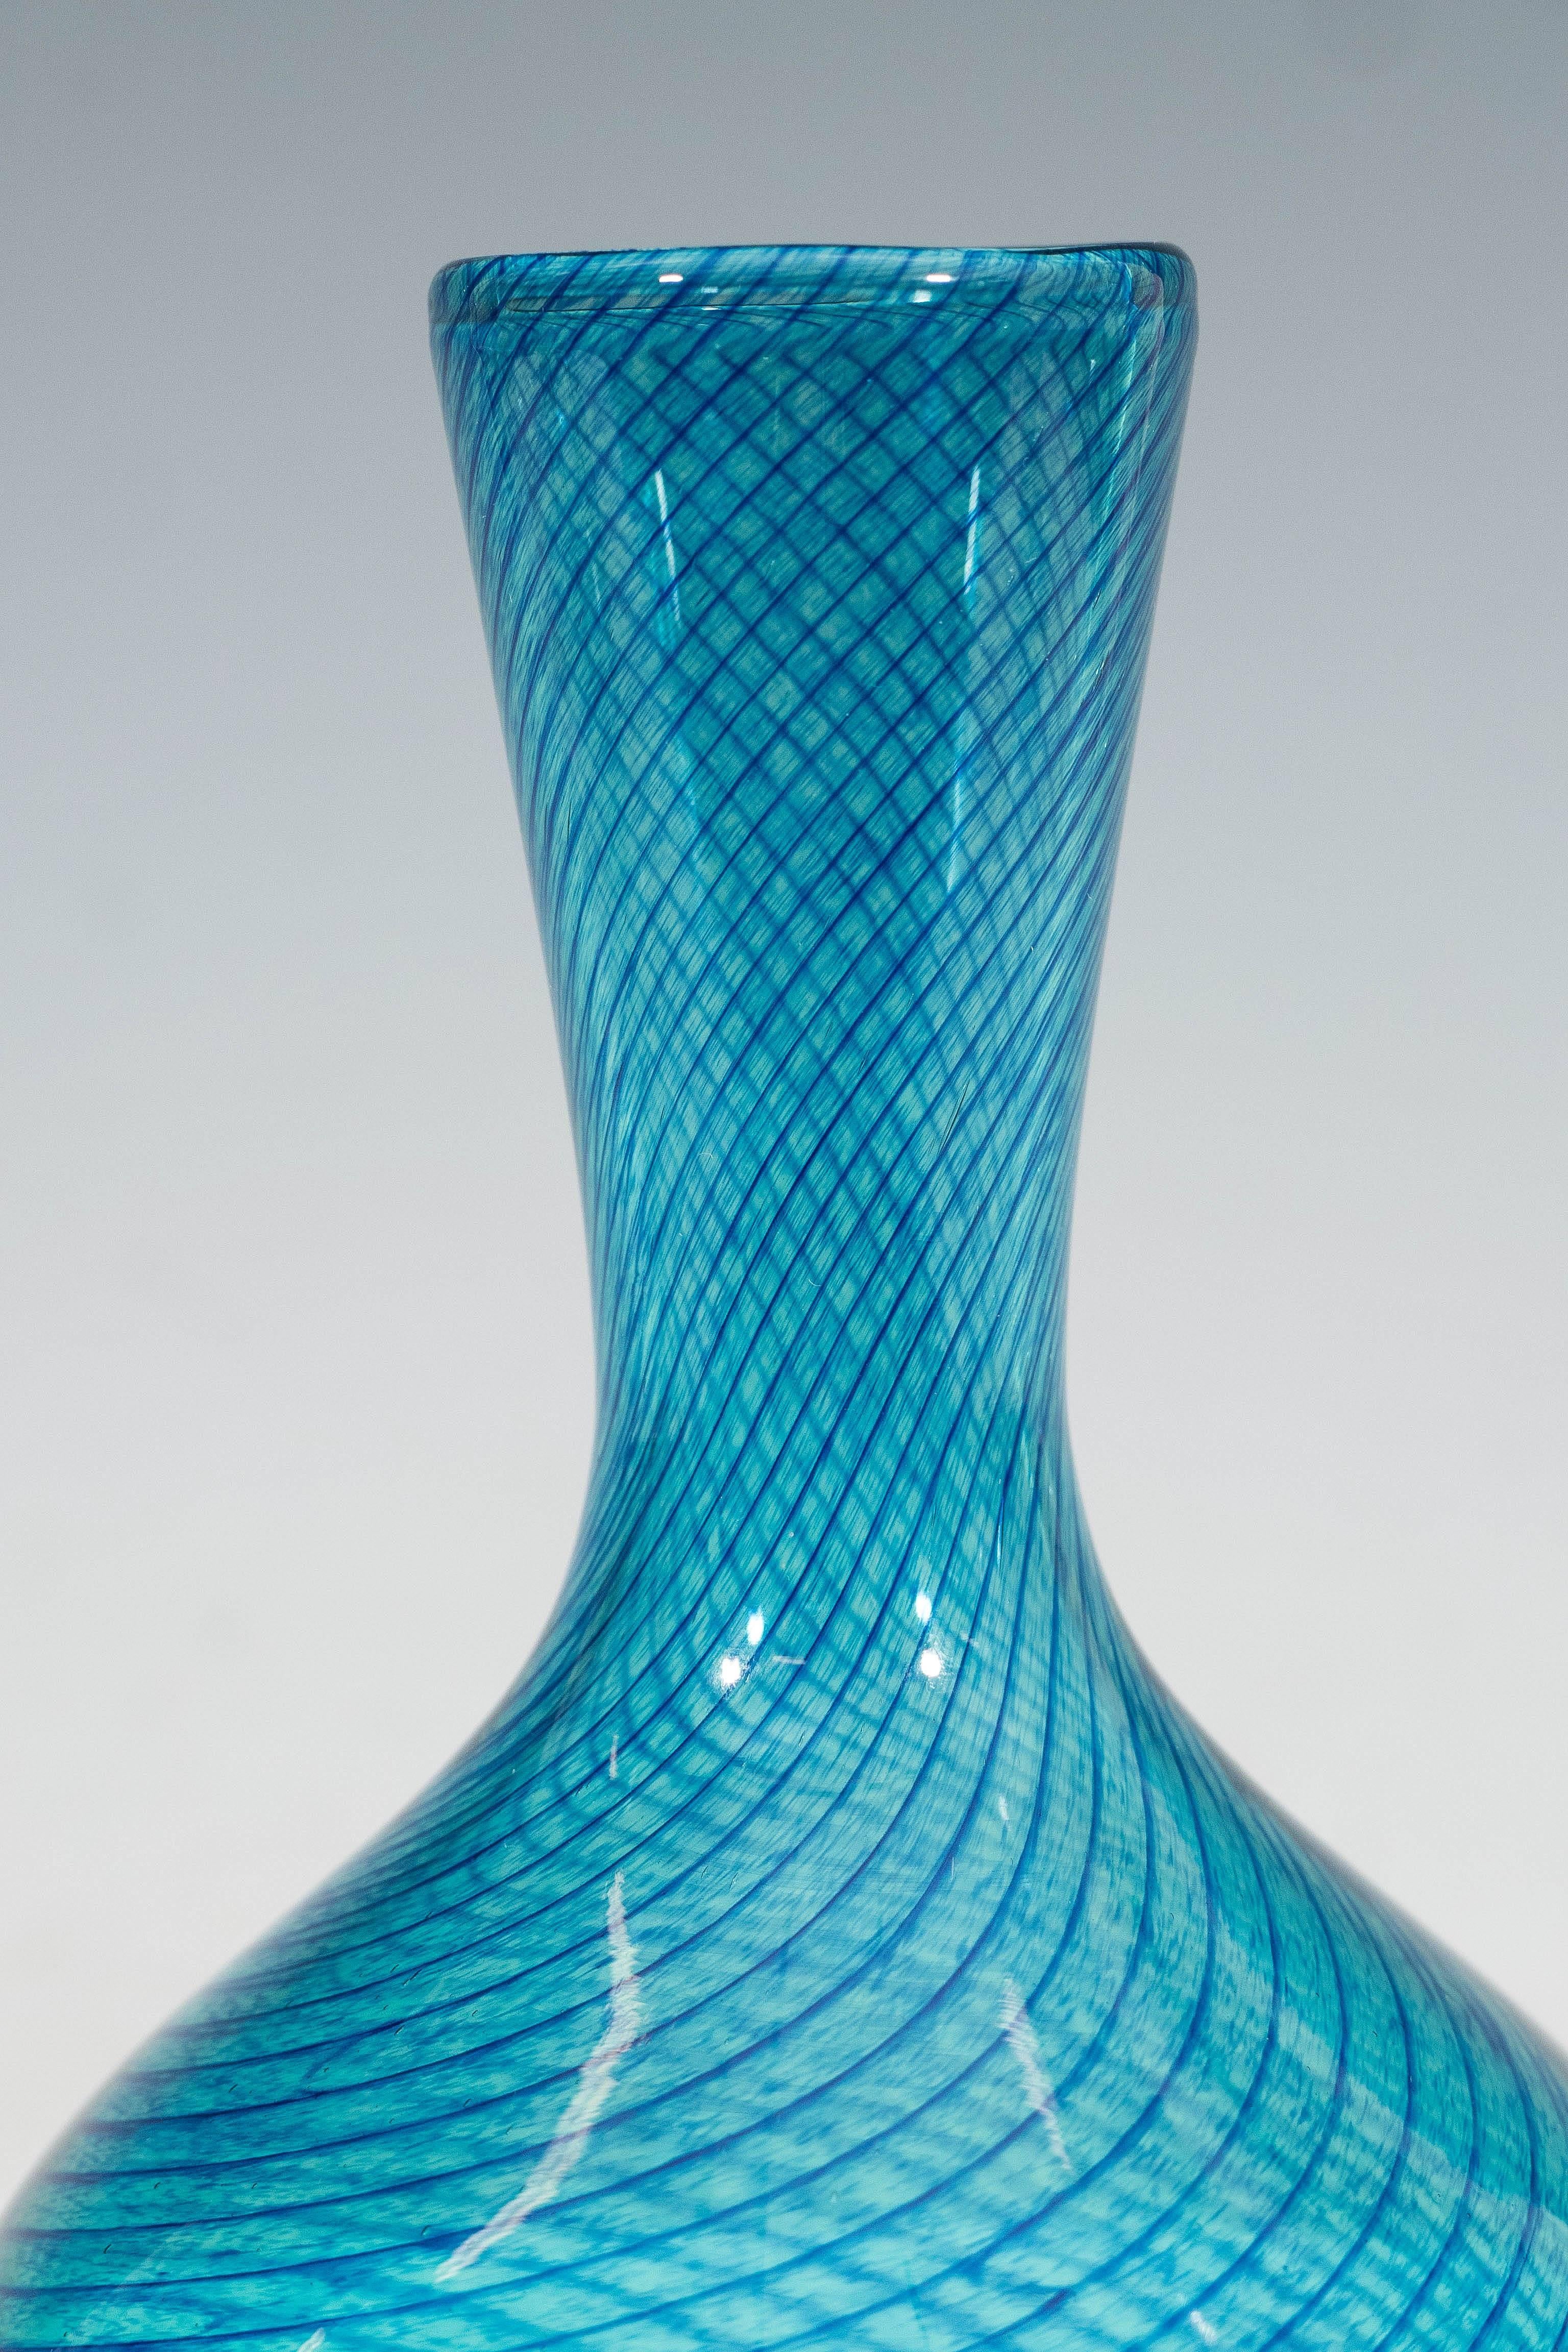 A vintage Norwegian blue blown glass vase, by Willy Johansson for Hadeland Glassworks, in baluster form, with mottled indigo swirls. Markings include [Hadeland], etched to the base. Very good condition, with minor wear to the underside, consistent